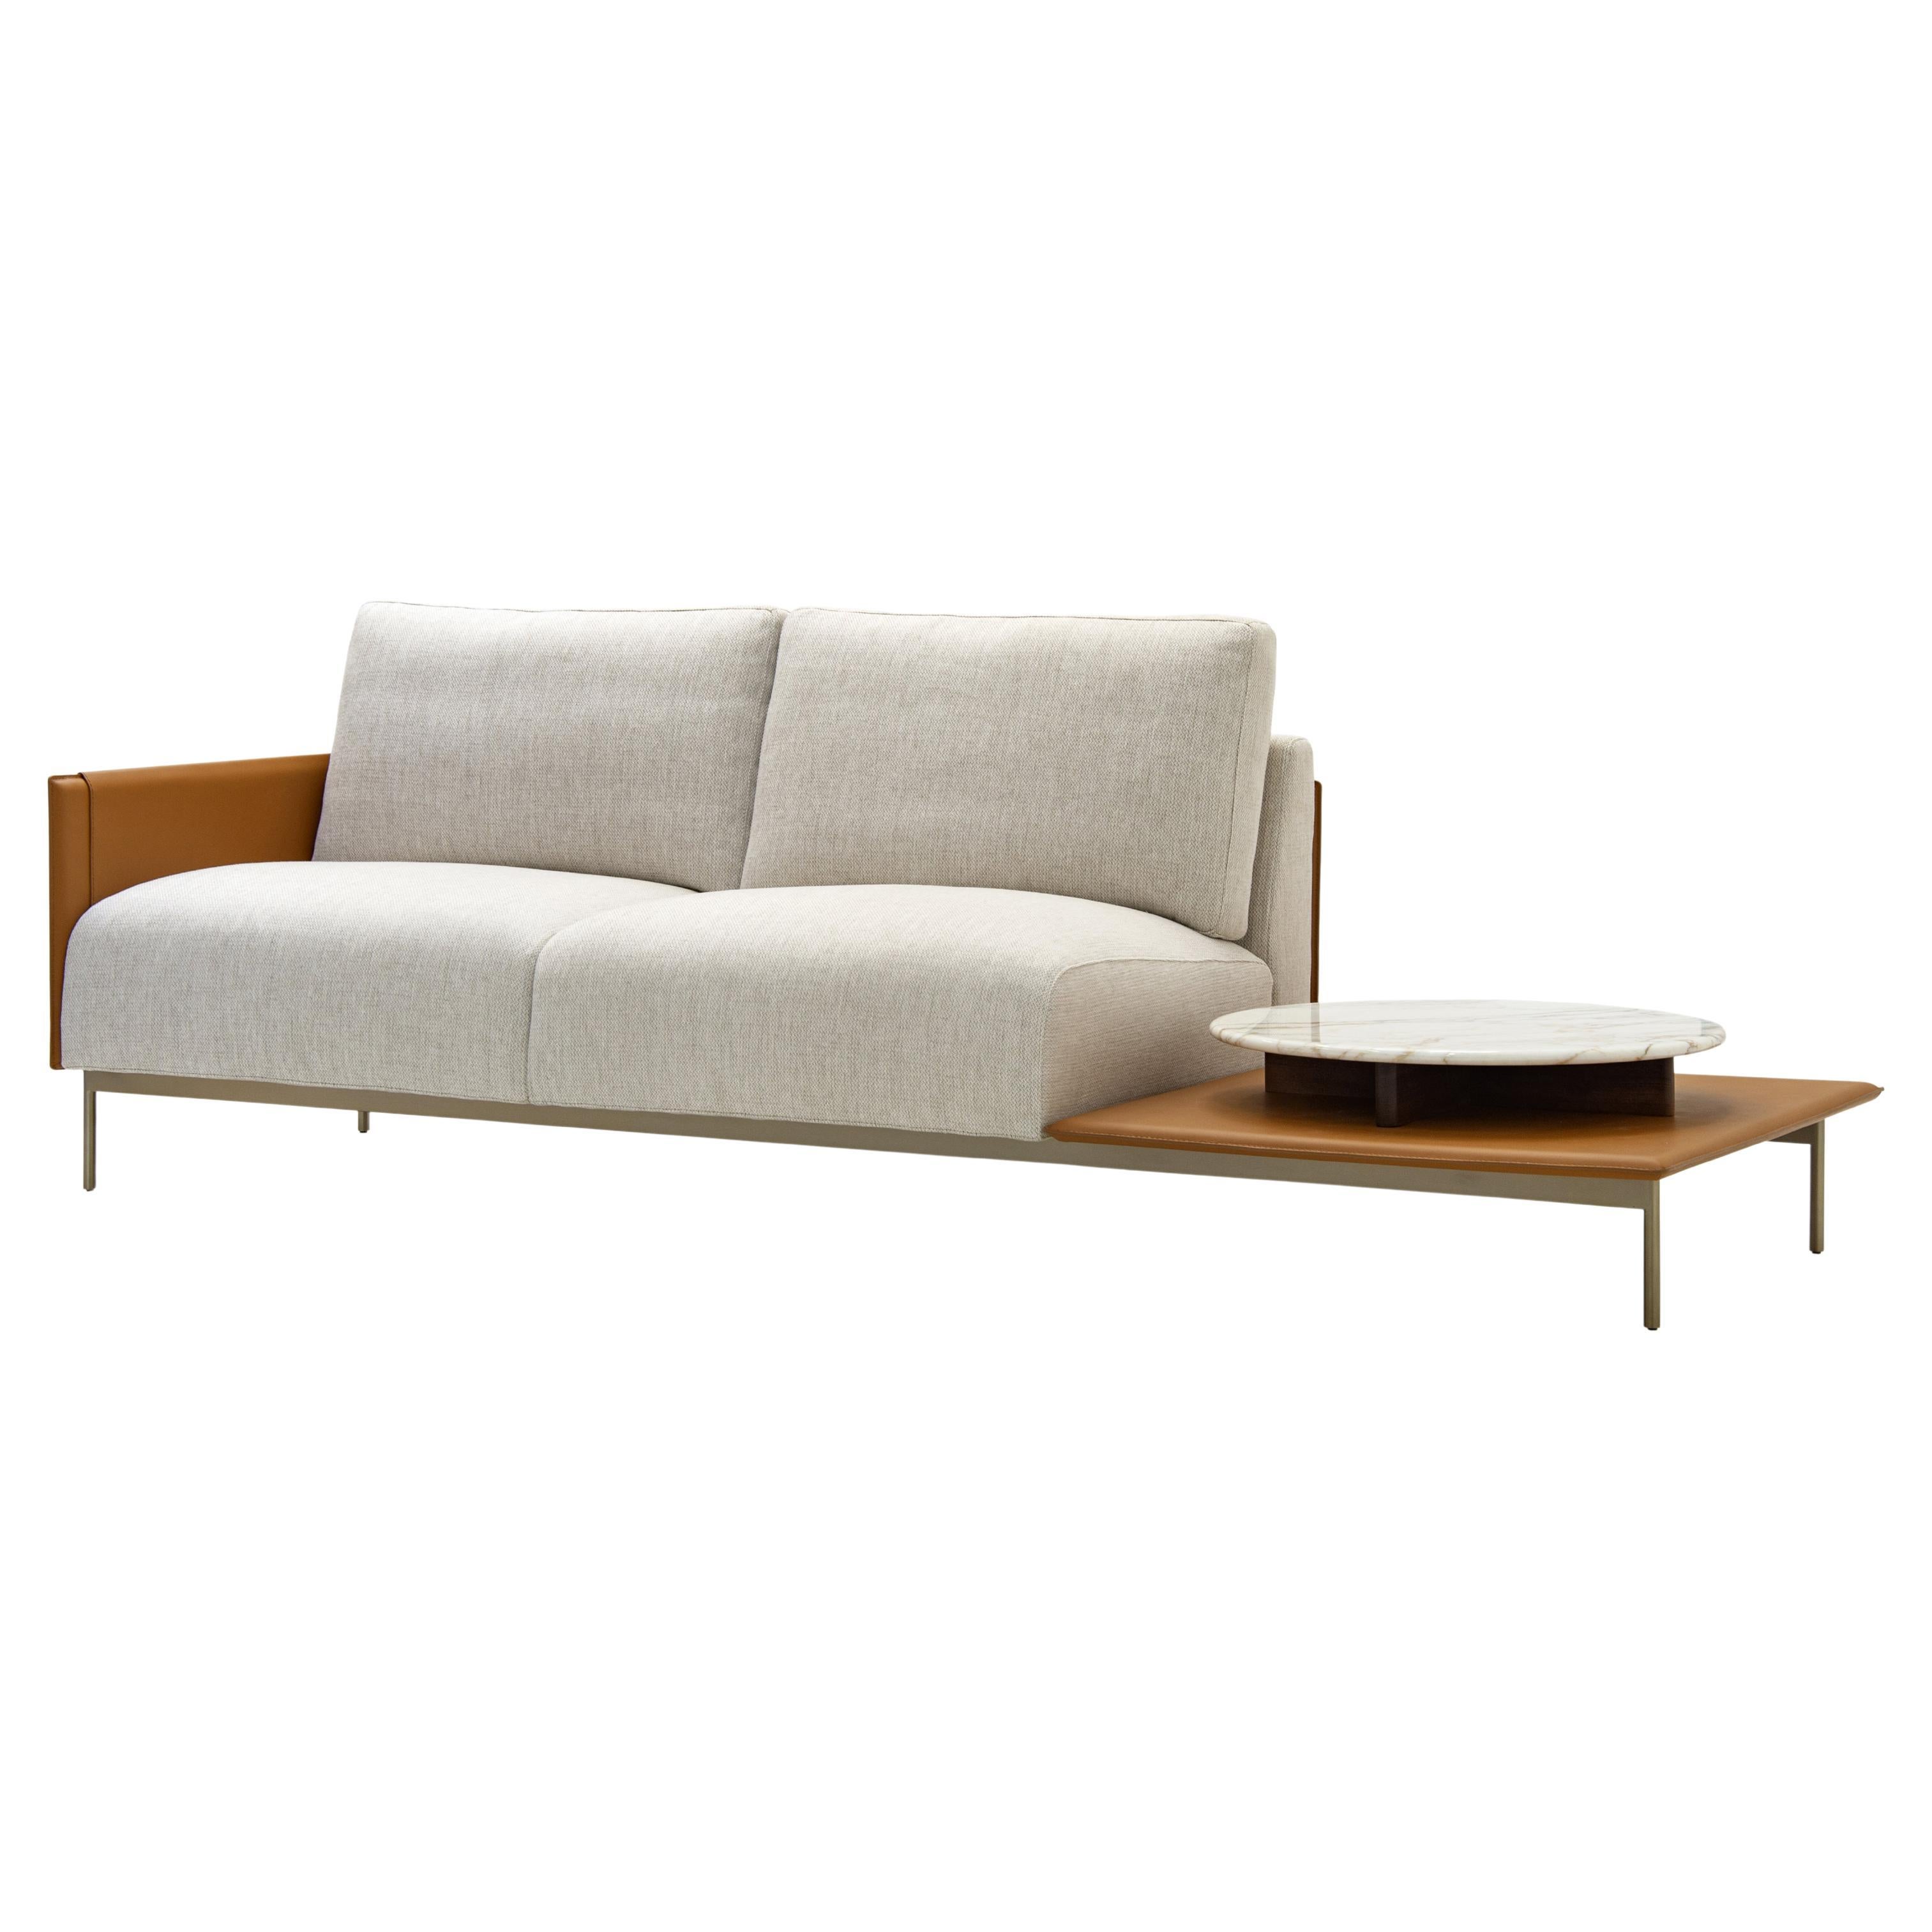 Design Contemporary, Icone Sofa with Tray in Natural Saddle Leather V215/T (canapé avec plateau en cuir sellier naturel) en vente